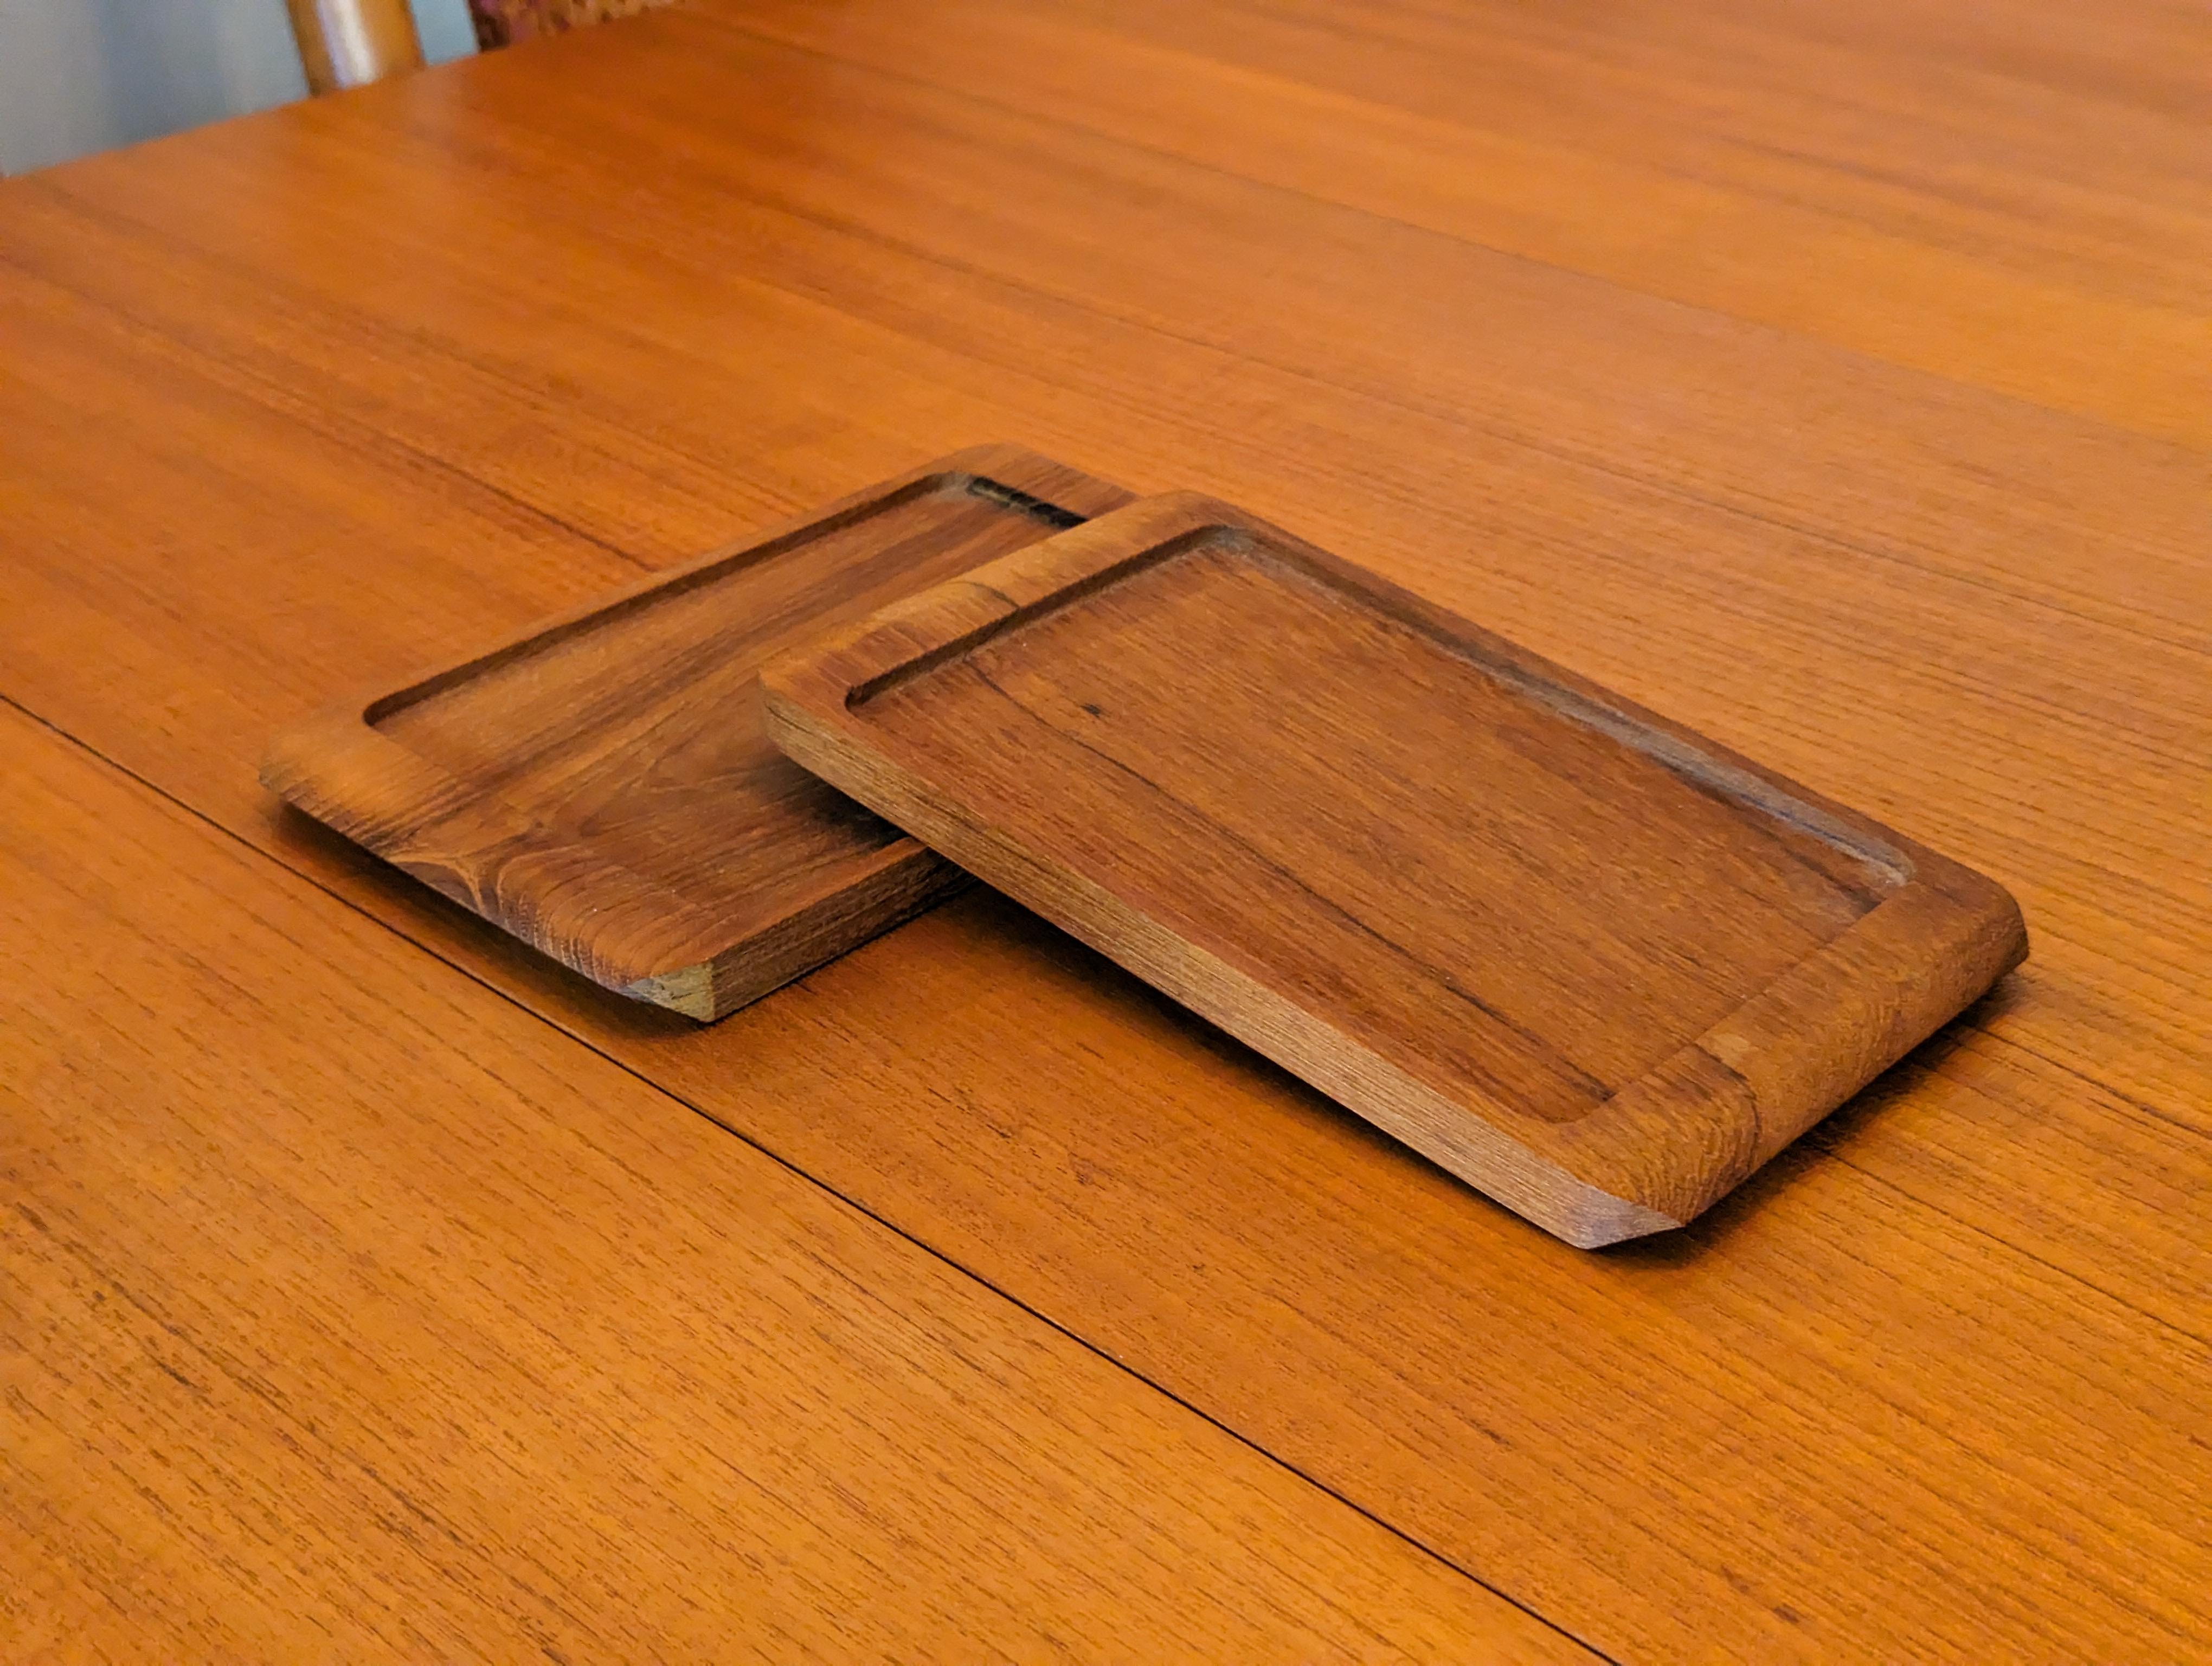 Vintage Danish Mid Century Modern Teak Trays by Laurids Lønborg, c1960s In Good Condition For Sale In Chino Hills, CA